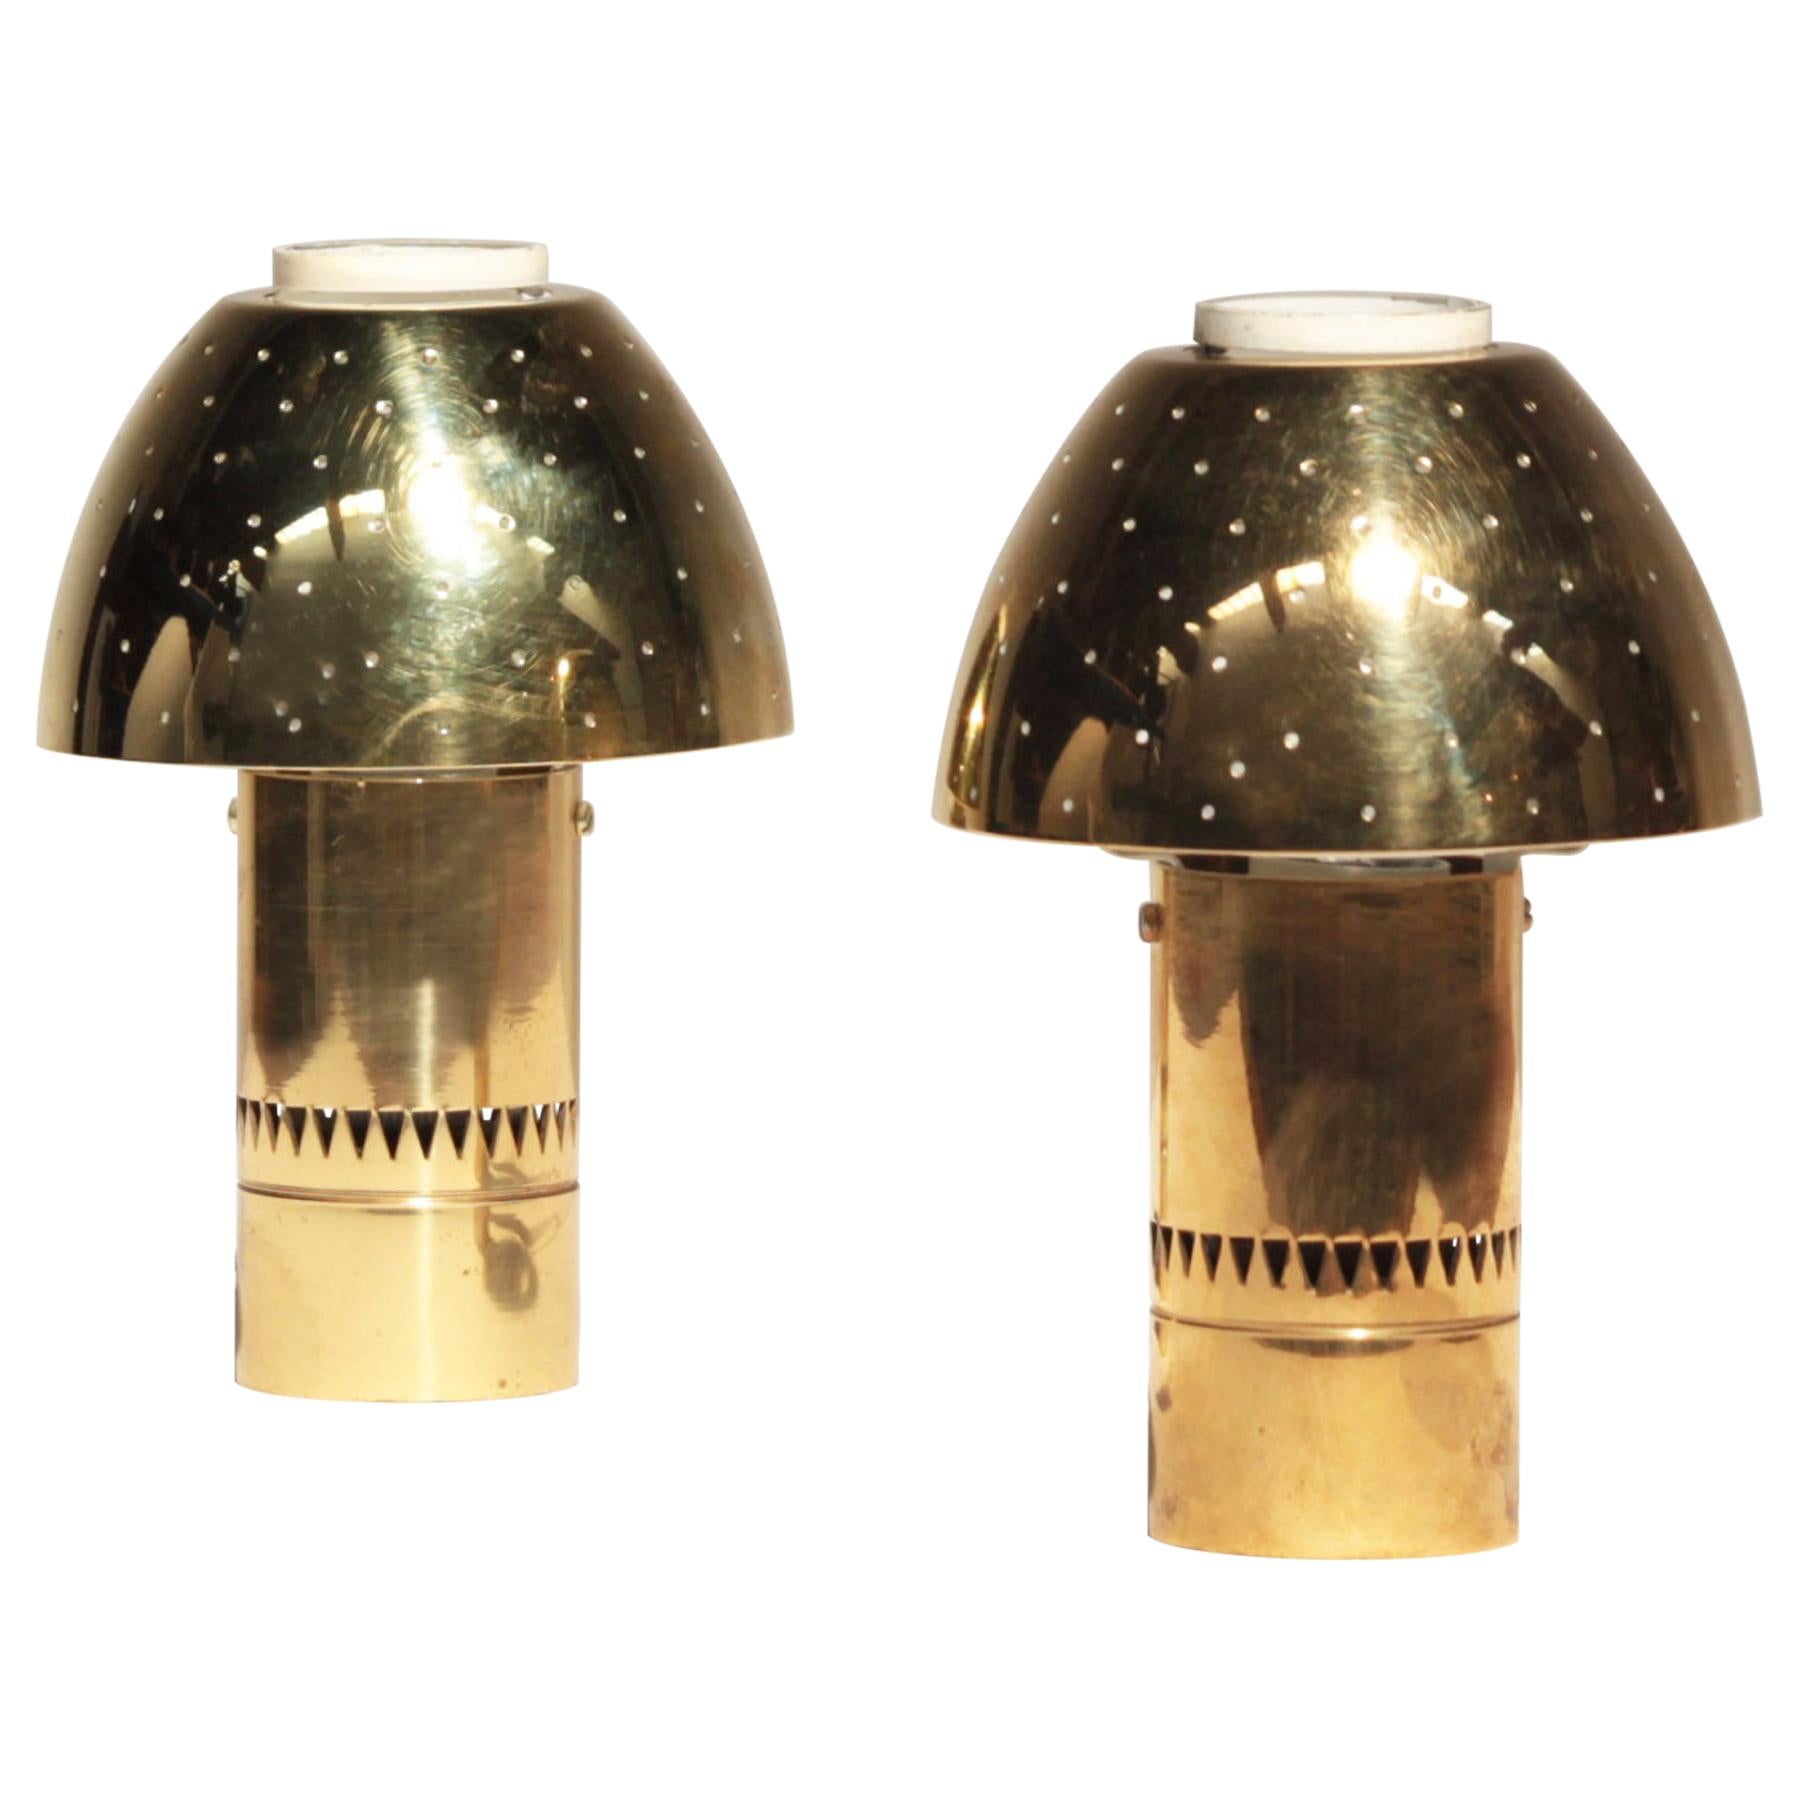 Pair of Rare Table Lamps Lights by Hans-Agne Jakobsson for AB Markaryd, Sweden